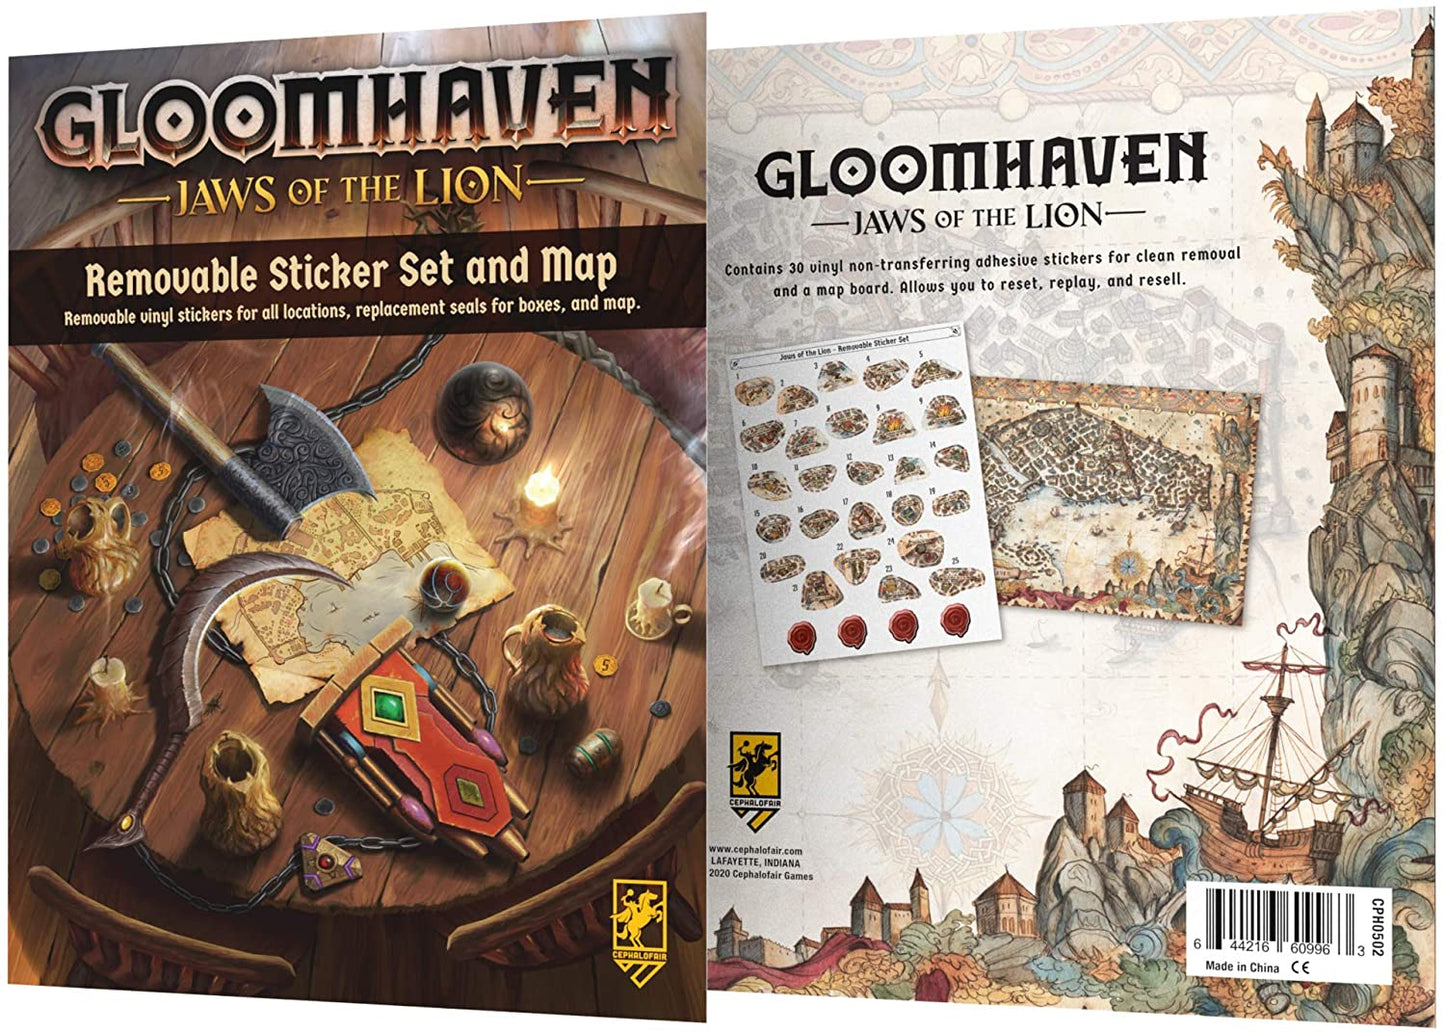 Gloomhaven: Jaws of The Lion - Removable Sticker Set and Map